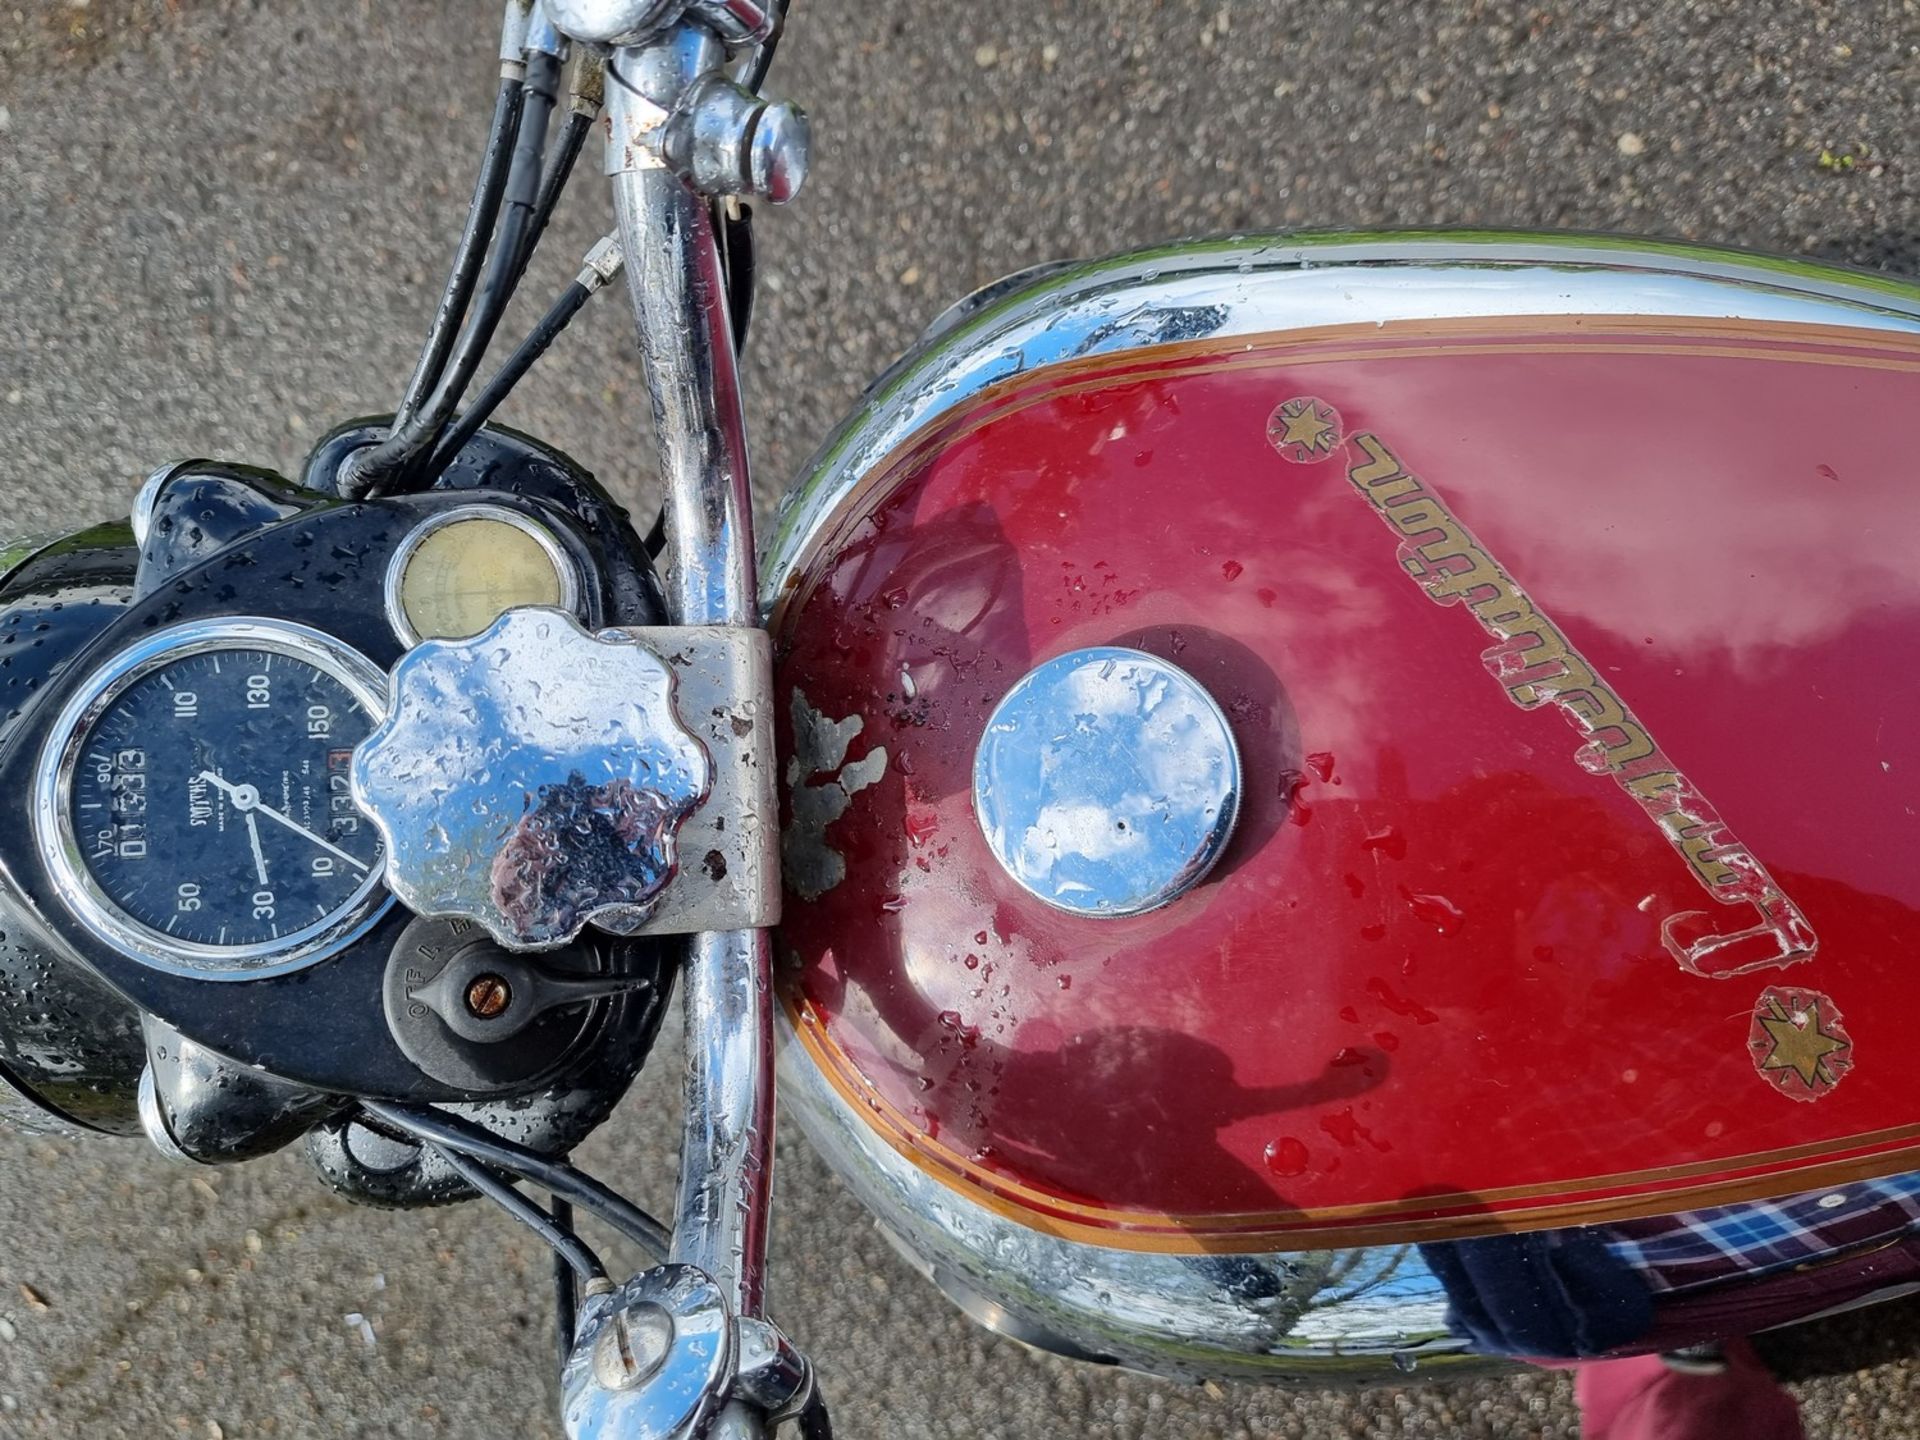 1958 Royal Enfield Constellation, 693 cc. Registration number 738 UXF (non transferrable). Frame - Image 11 of 16